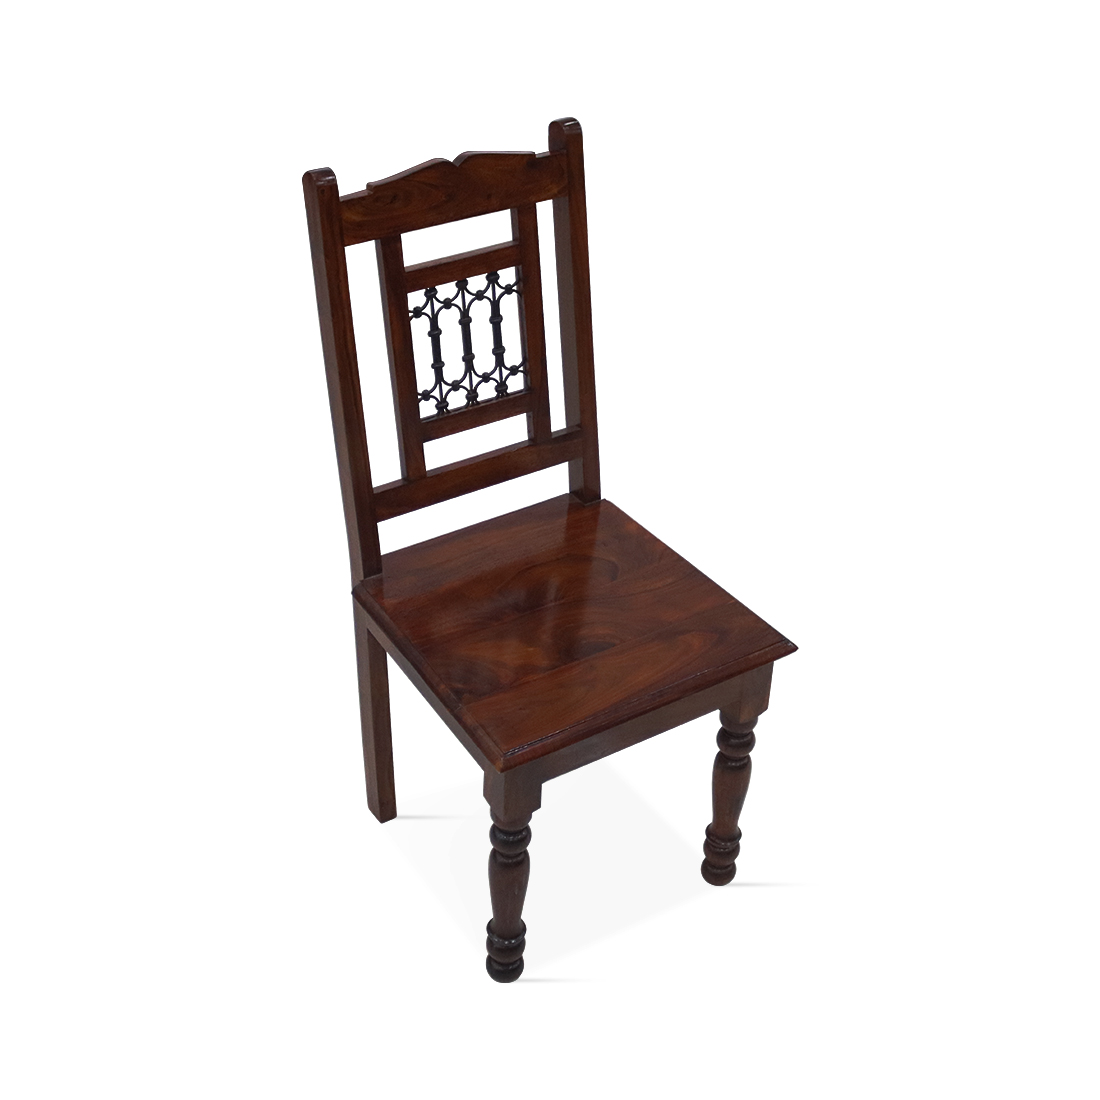 Aaram By Zebrs Sheesham Wooden Dining Chair